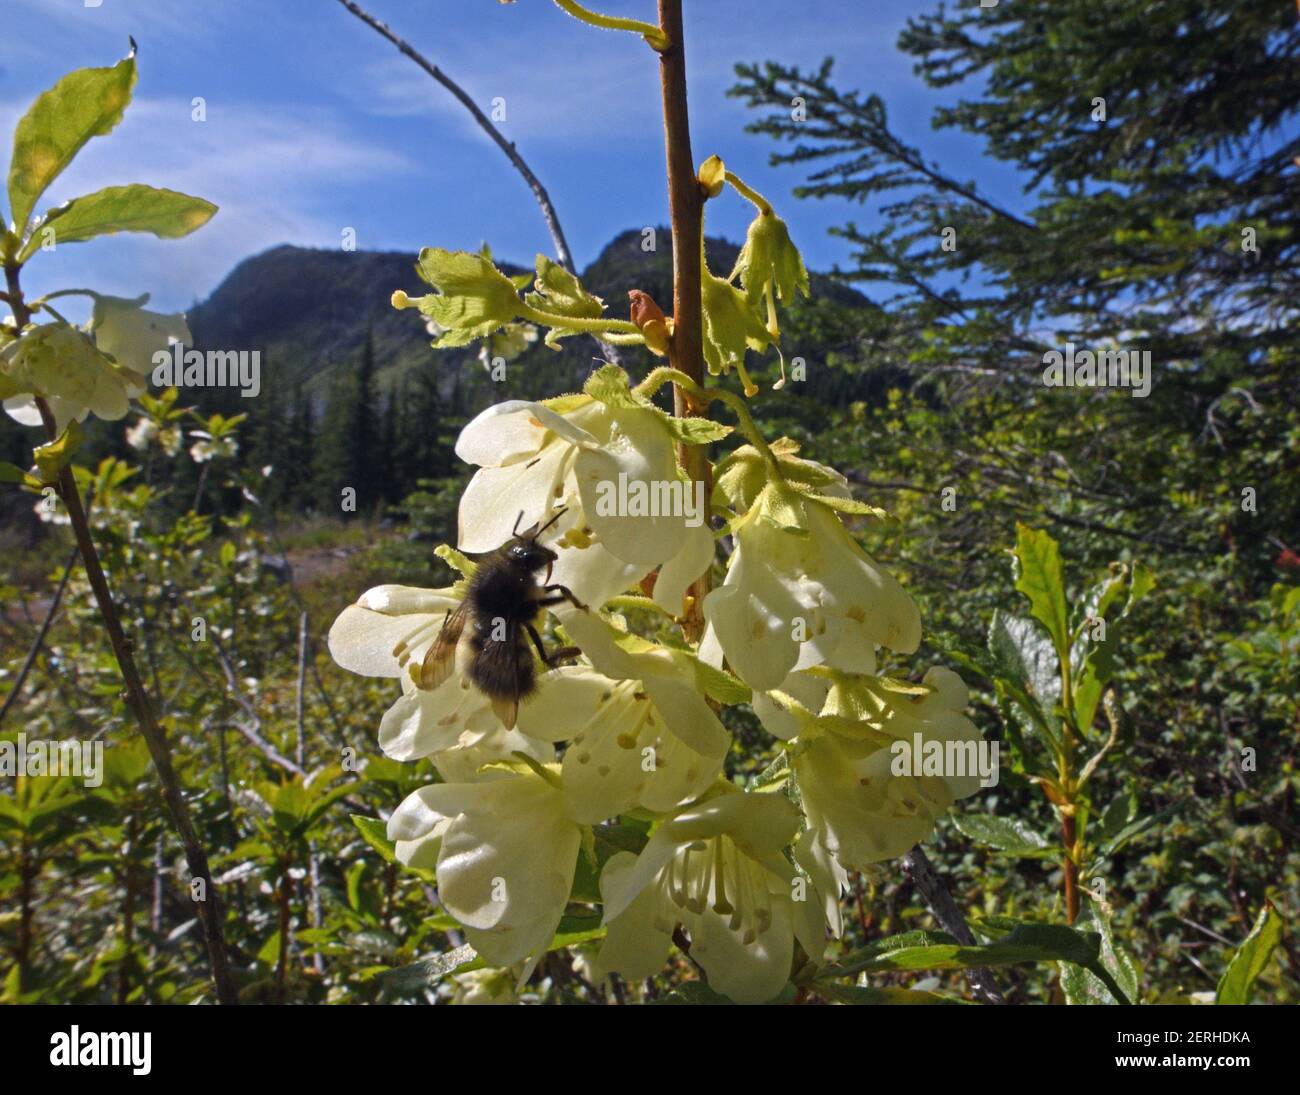 Bumble bee (possibly bombus mixtus) getting nectar from a white-flowered rhododendron in the Northwest Peak Scenic Area, MT. (Photo by Randy Beacham) Stock Photo